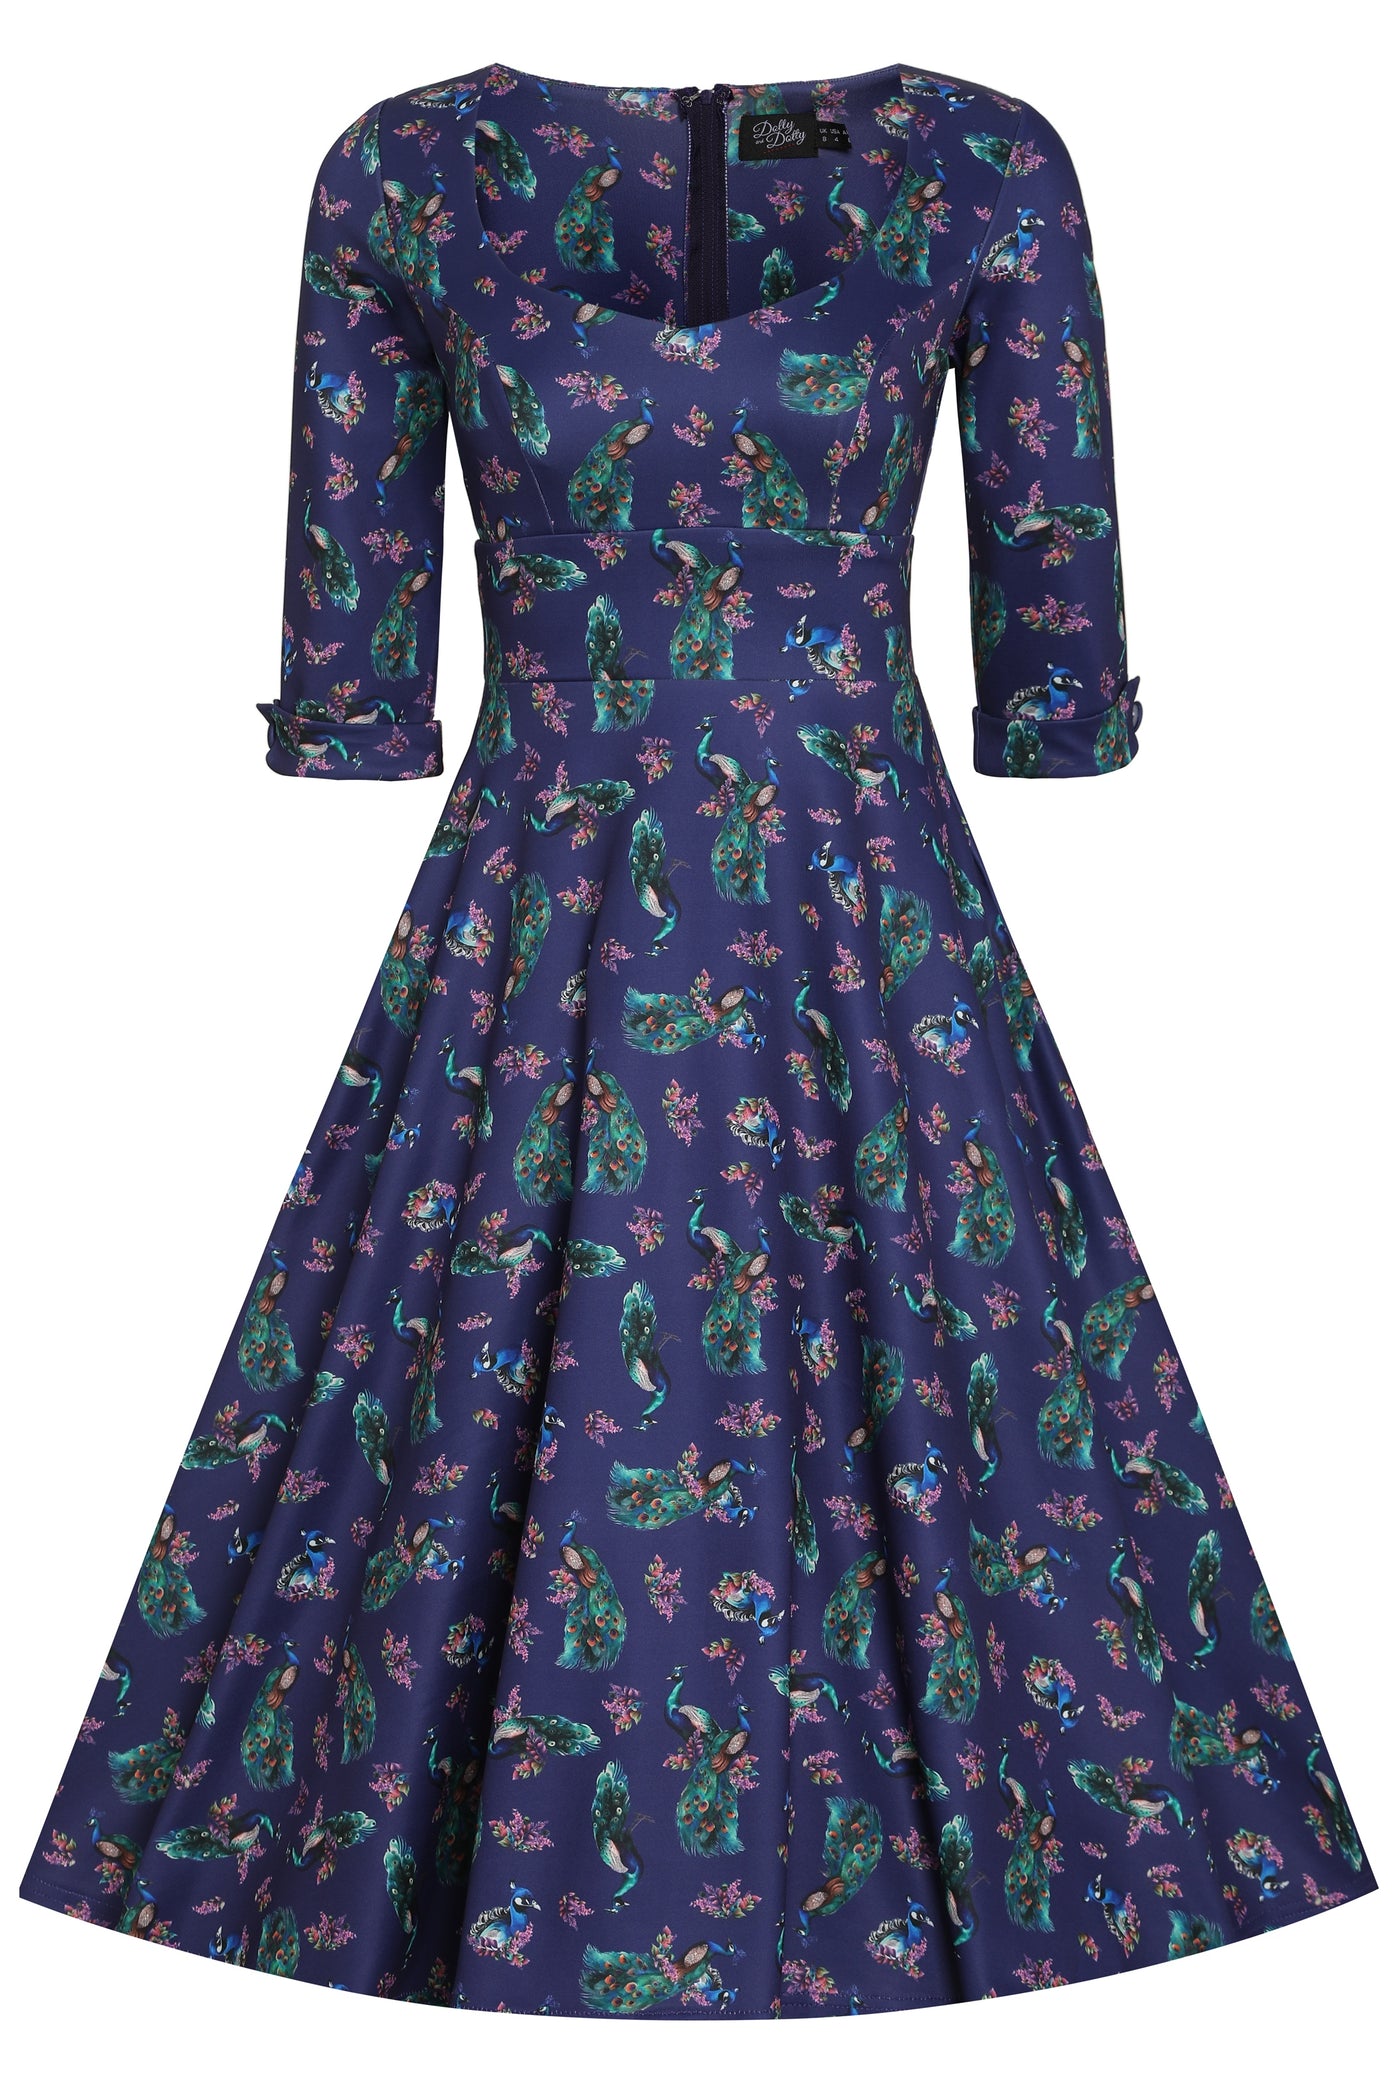 Front view of our long sleeved midi dress, in purple peacock bird print